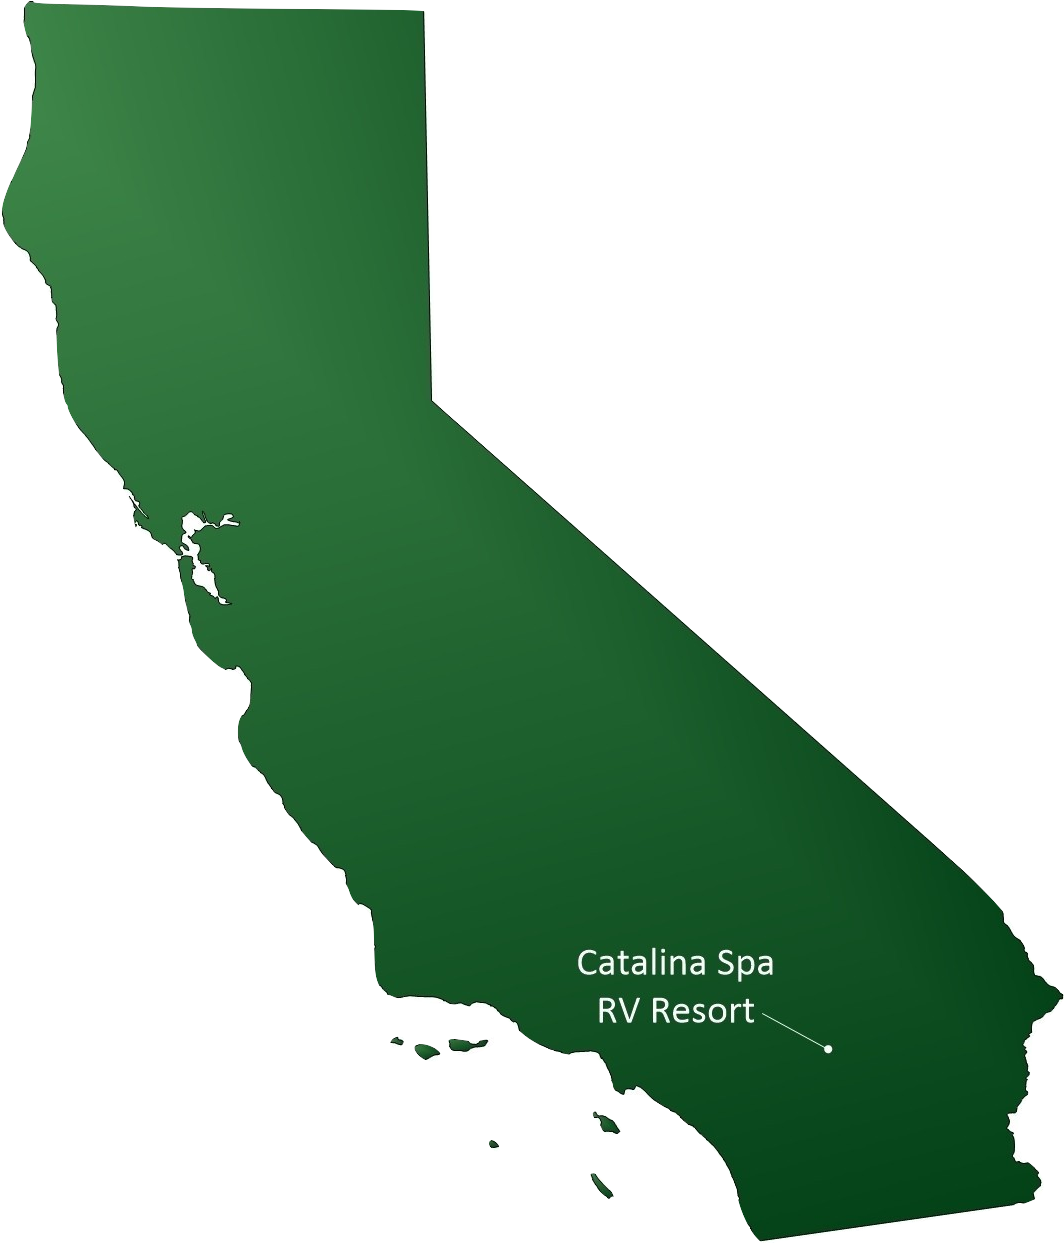 Catalina Spa on the map burned